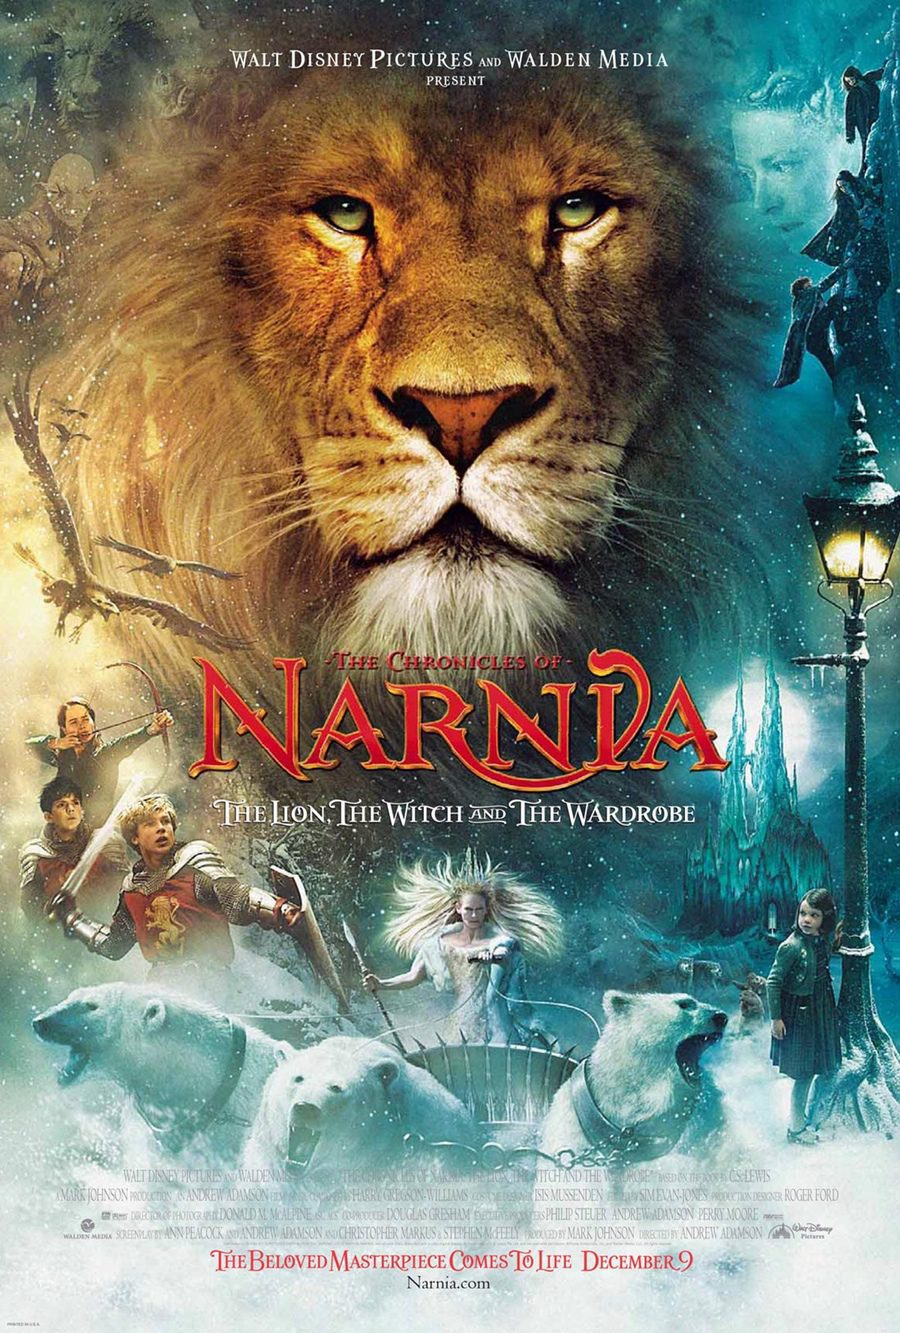 Poster of The Chronicles of Narnia: The Lion, the Witch and the Wardrobe - Estados Unidos